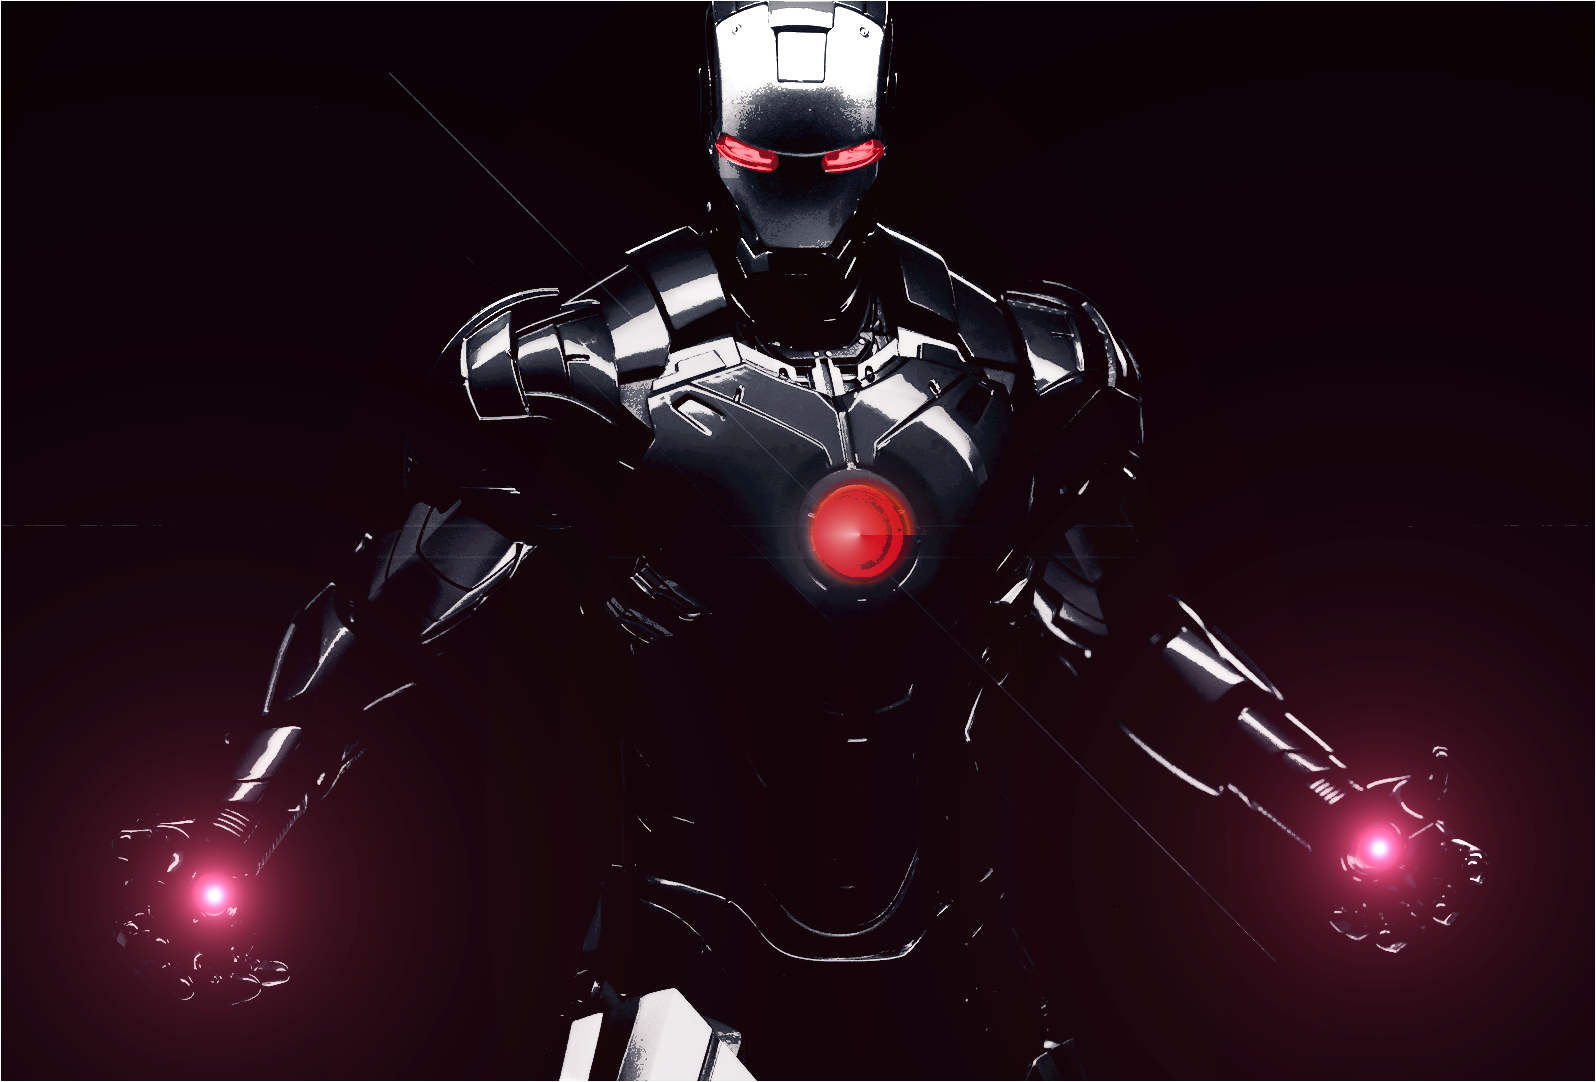 Who is the Black Iron Man